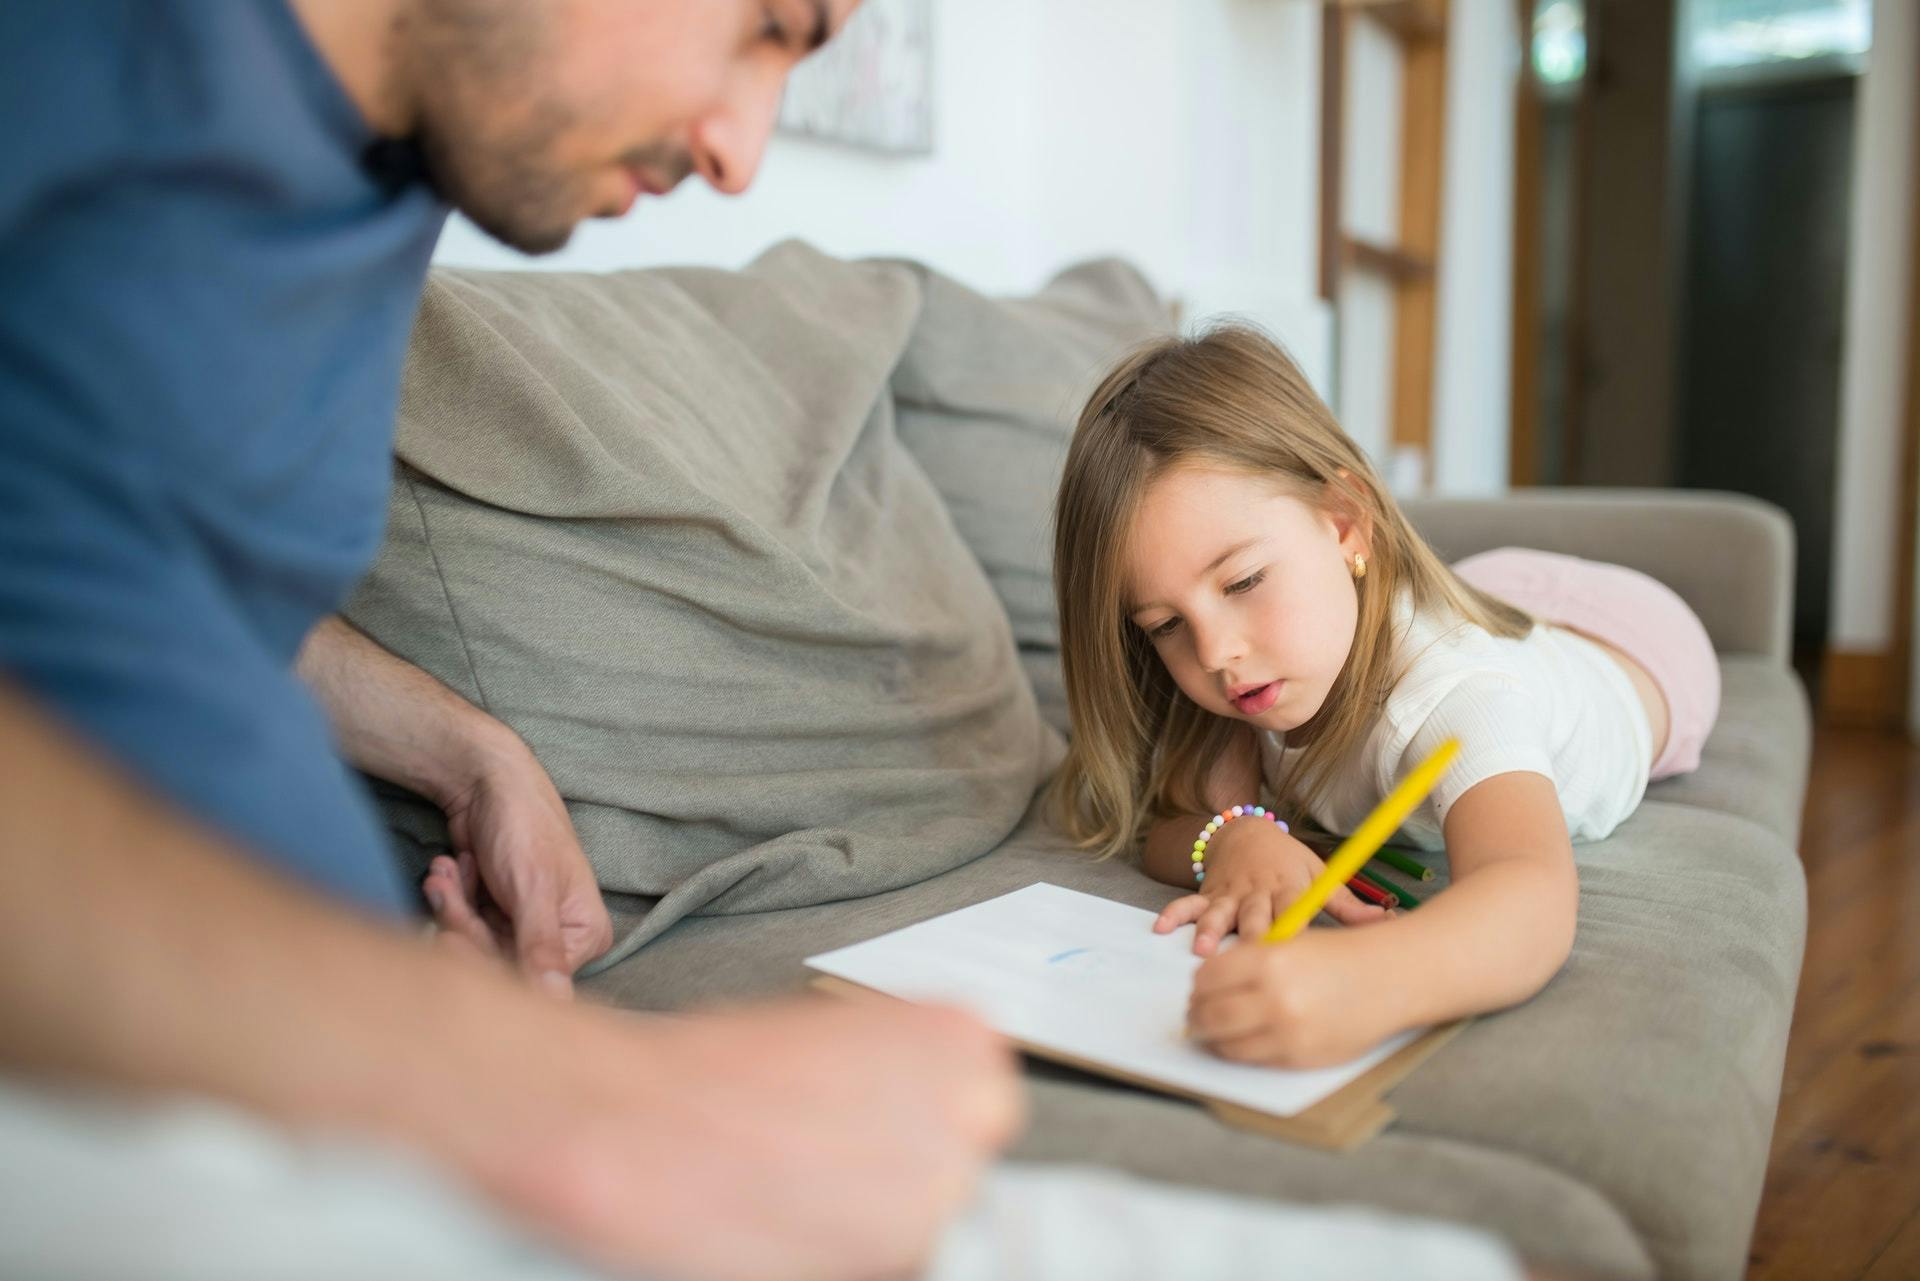 Young girls works with her father on writing activities on their couch.